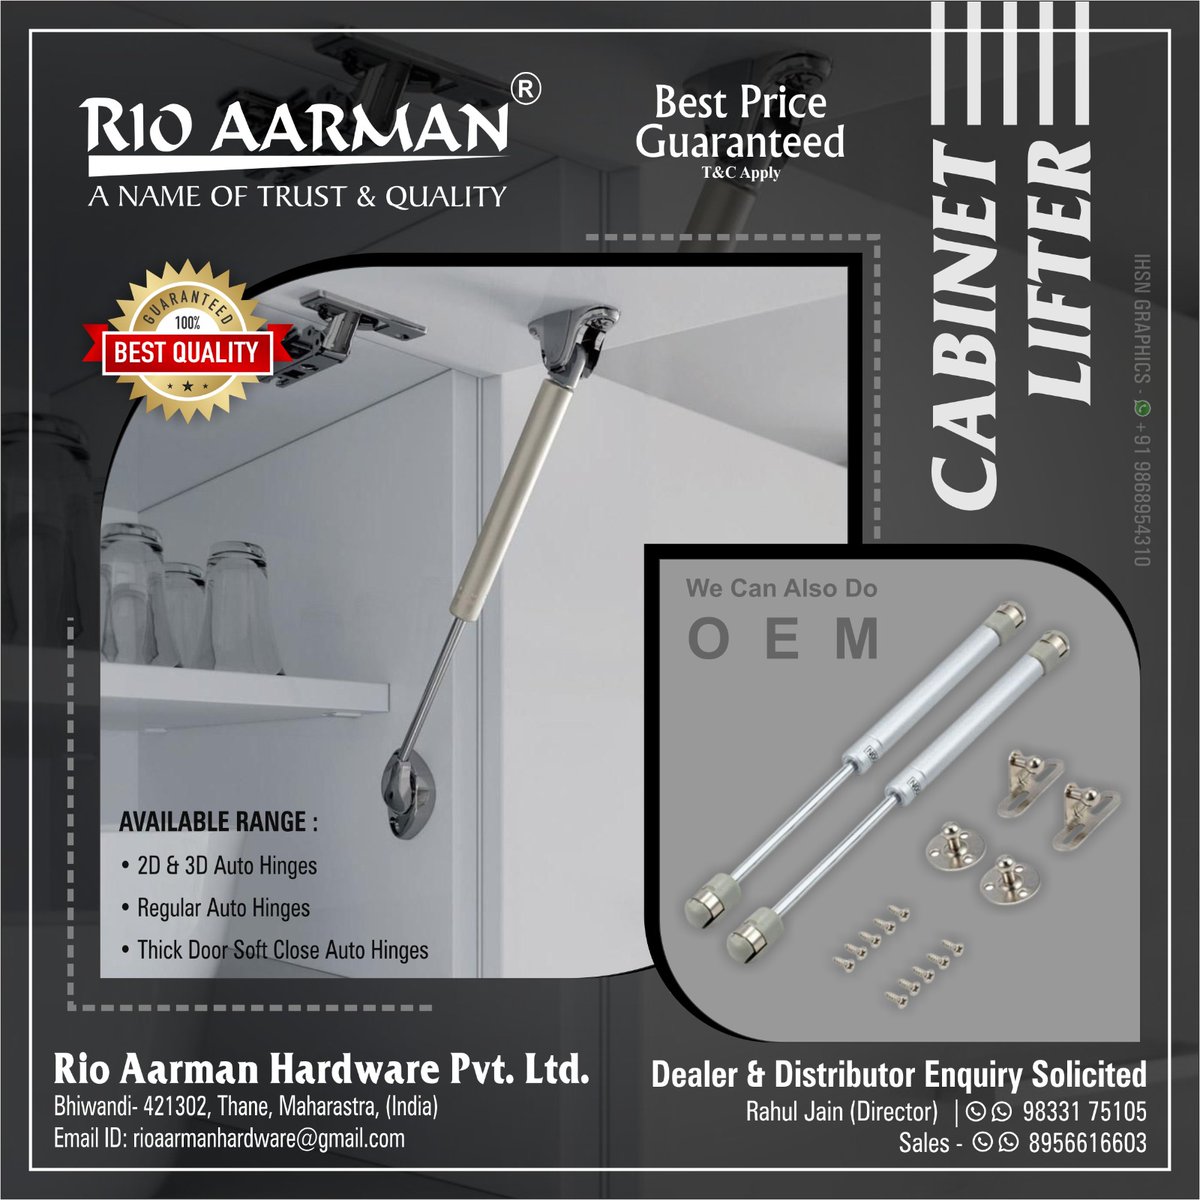 “𝐑𝐈𝐎 𝐀𝐀𝐑𝐌𝐀𝐍 𝐇𝐀𝐑𝐃𝐖𝐀𝐑𝐄' Brings best Cabinet Lifter it will add more power and strength to your Cabinets.

#rioaarmanhardware #Aaro #hardwarestore #AutoHinges #SlidingTrackRollers #Tendombox #hardware #OEM